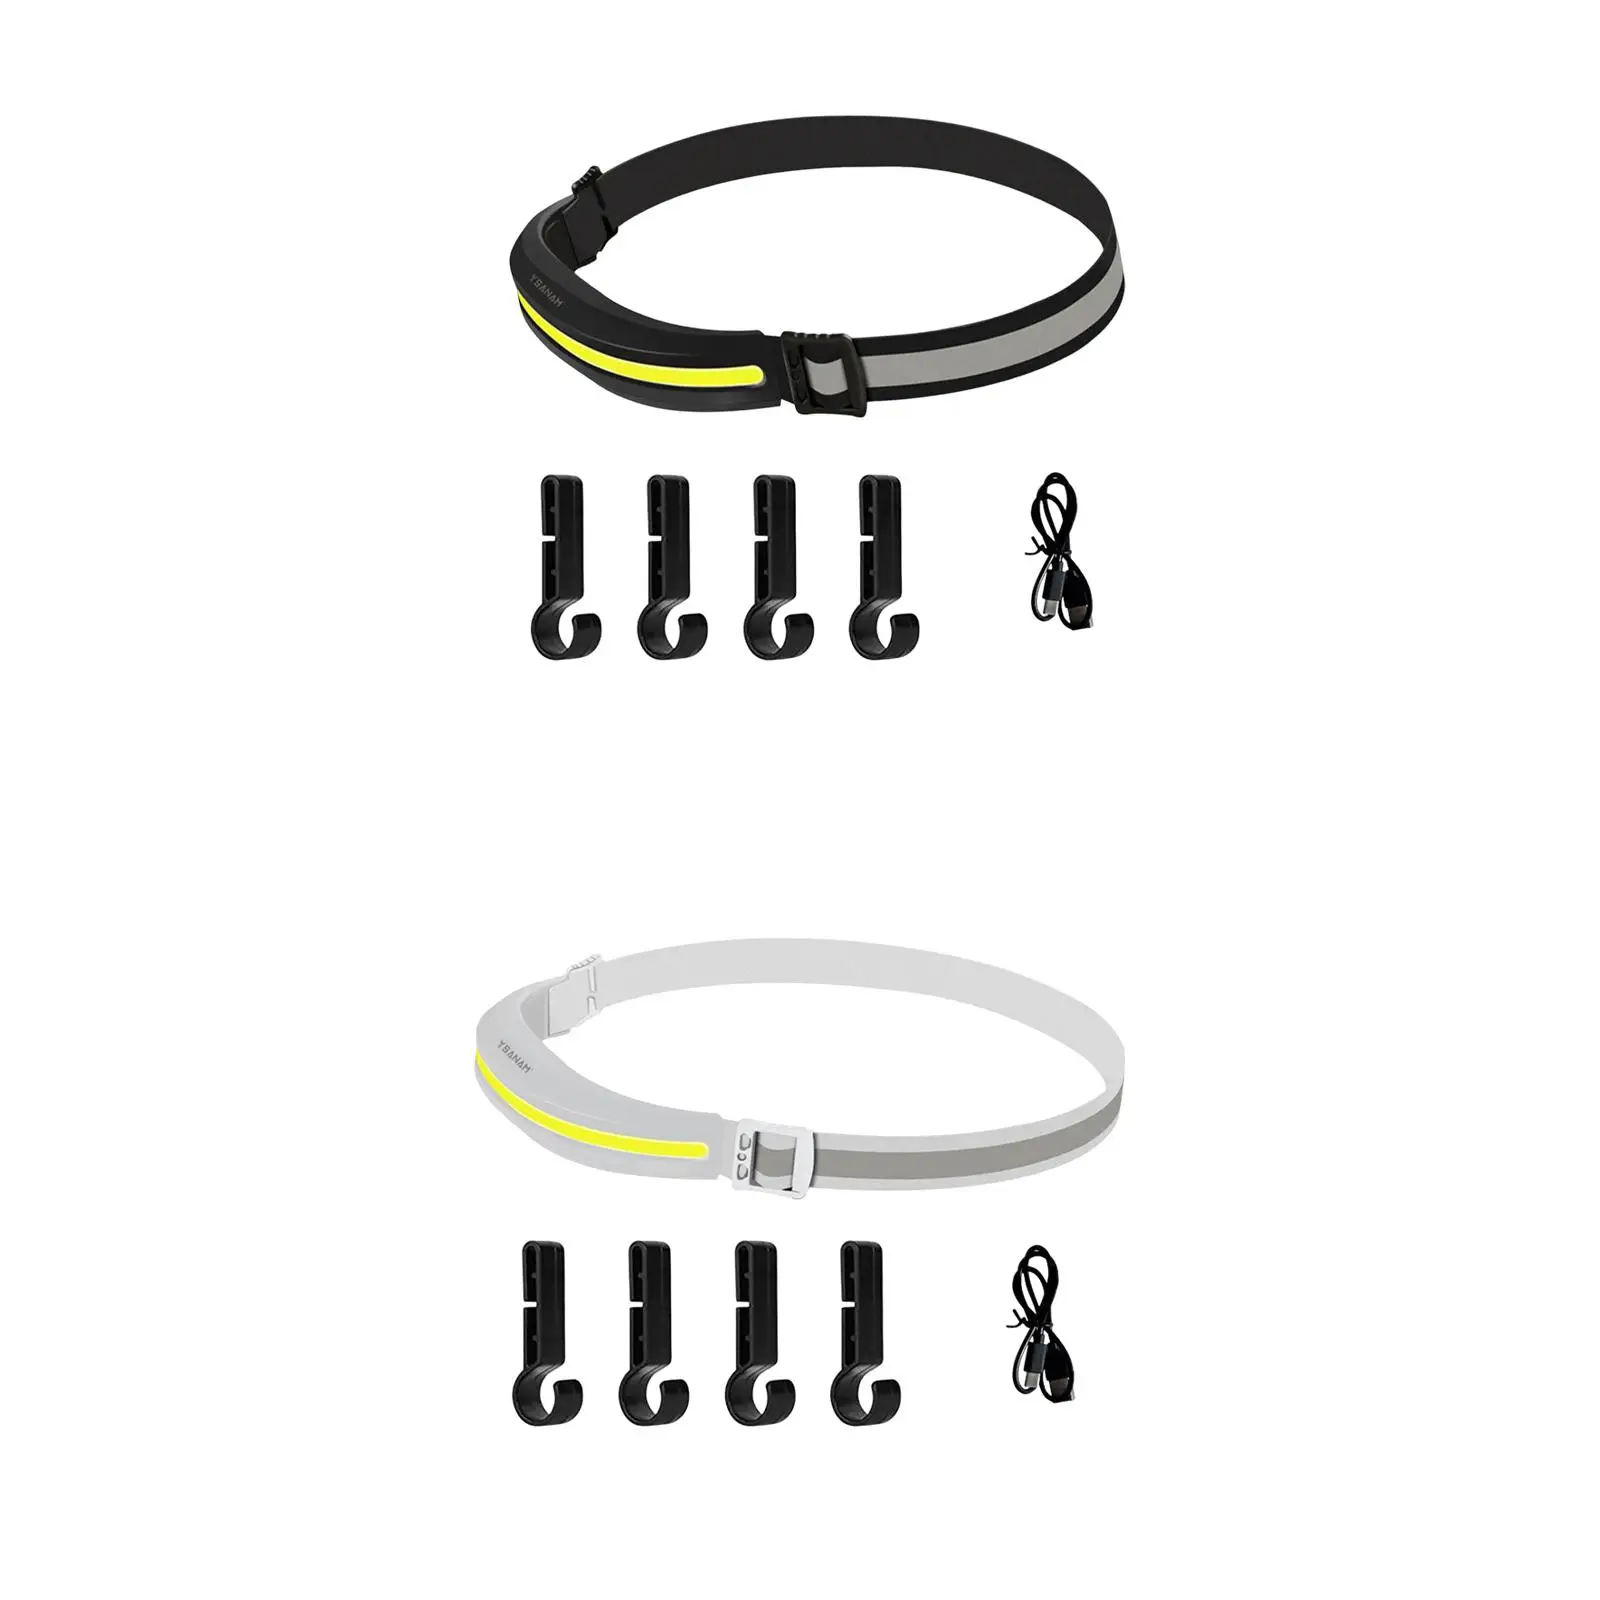 LED Headlight Comfortable Elastic Head Band Light COB Headlamp for Running Cycling Camping Outdoor